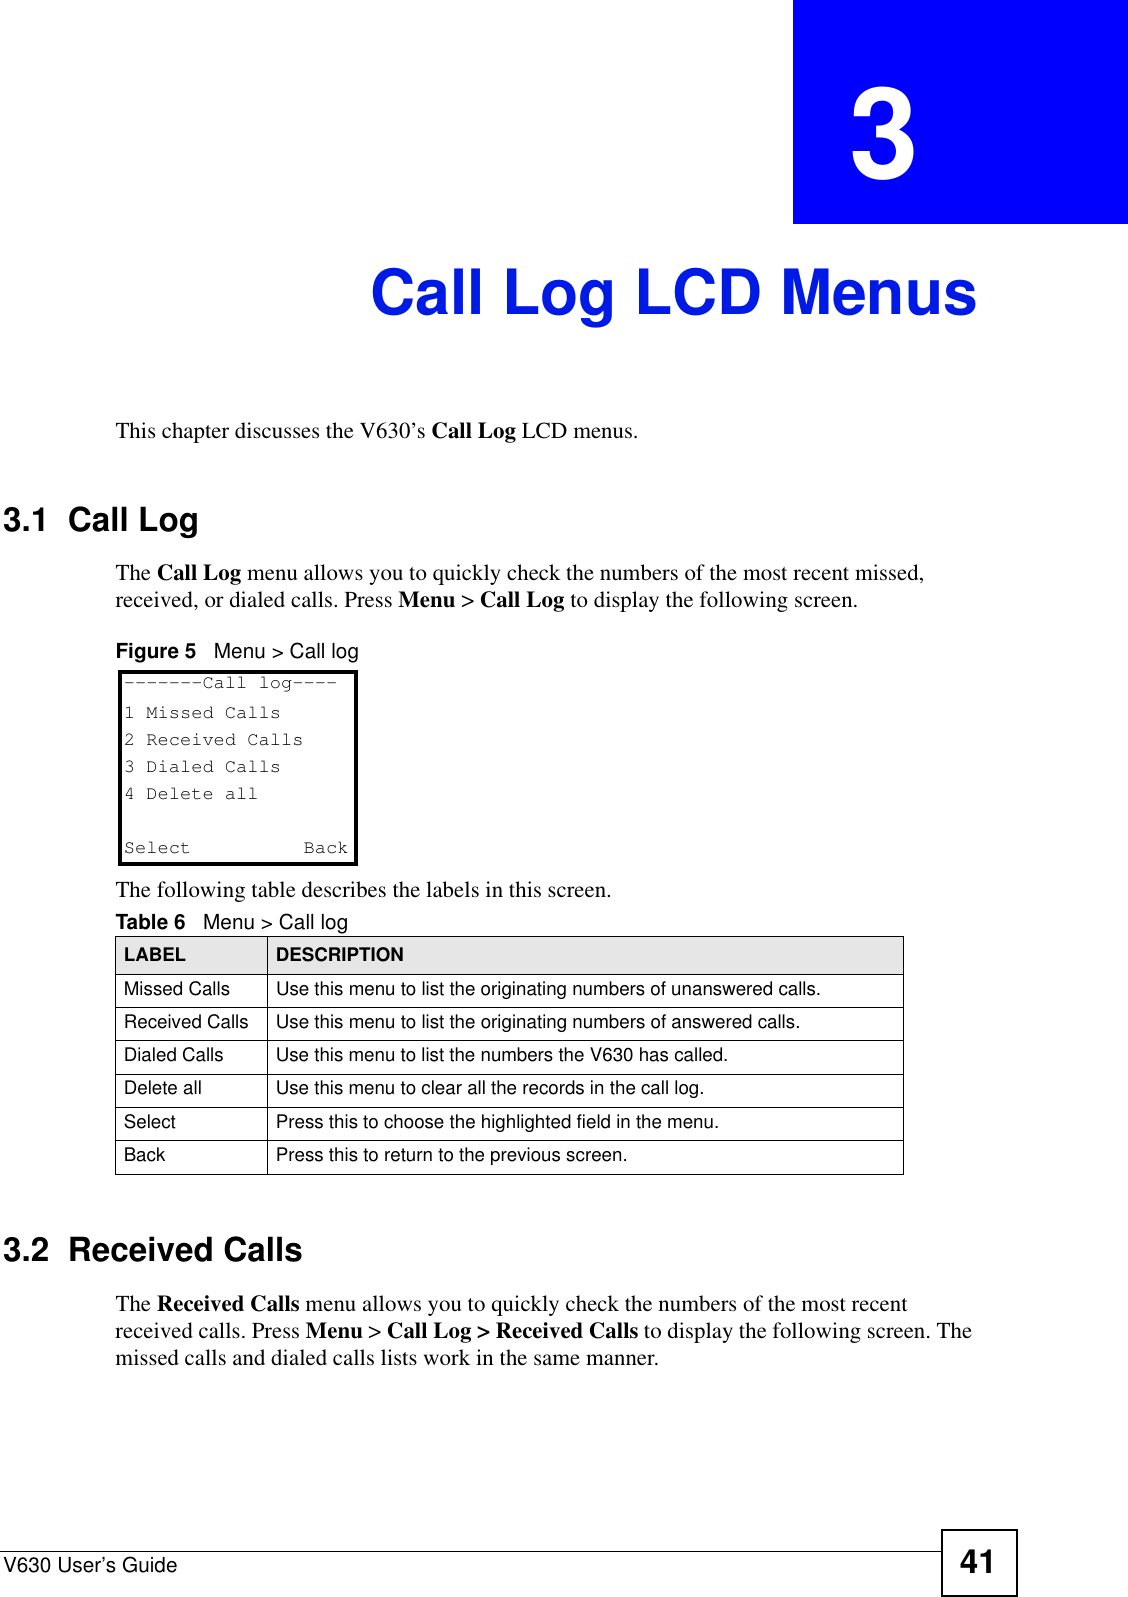 V630 User’s Guide 41CHAPTER  3 Call Log LCD MenusThis chapter discusses the V630’s Call Log LCD menus.3.1  Call LogThe Call Log menu allows you to quickly check the numbers of the most recent missed, received, or dialed calls. Press Menu &gt; Call Log to display the following screen.Figure 5   Menu &gt; Call logThe following table describes the labels in this screen.3.2  Received CallsThe Received Calls menu allows you to quickly check the numbers of the most recent received calls. Press Menu &gt; Call Log &gt; Received Calls to display the following screen. The missed calls and dialed calls lists work in the same manner.Table 6   Menu &gt; Call logLABEL DESCRIPTIONMissed Calls Use this menu to list the originating numbers of unanswered calls.Received Calls Use this menu to list the originating numbers of answered calls.Dialed Calls Use this menu to list the numbers the V630 has called.Delete all Use this menu to clear all the records in the call log.Select Press this to choose the highlighted field in the menu.Back Press this to return to the previous screen.-------Call log----1 Missed Calls2 Received Calls3 Dialed Calls4 Delete allSelect   Back